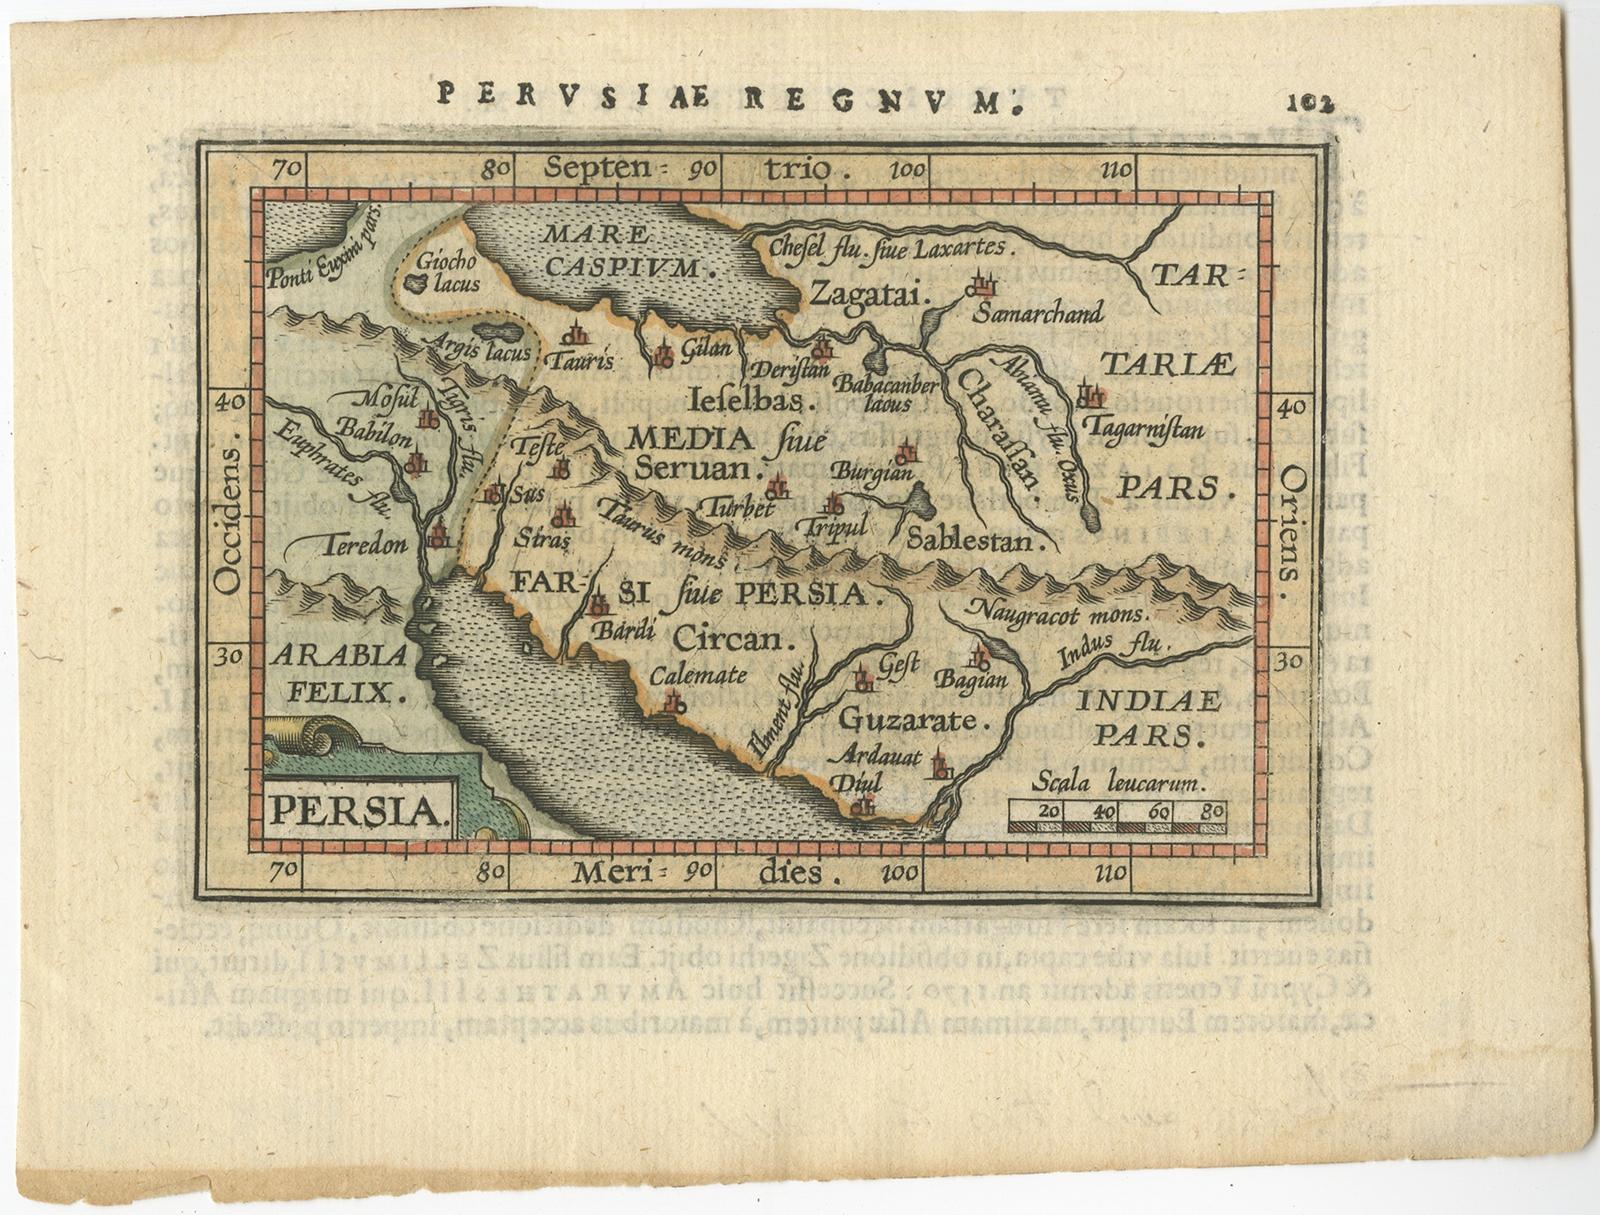 Antique miniature map titled 'Persia'. Small map of Persia published in the Epitome, or pocket-edition of the 